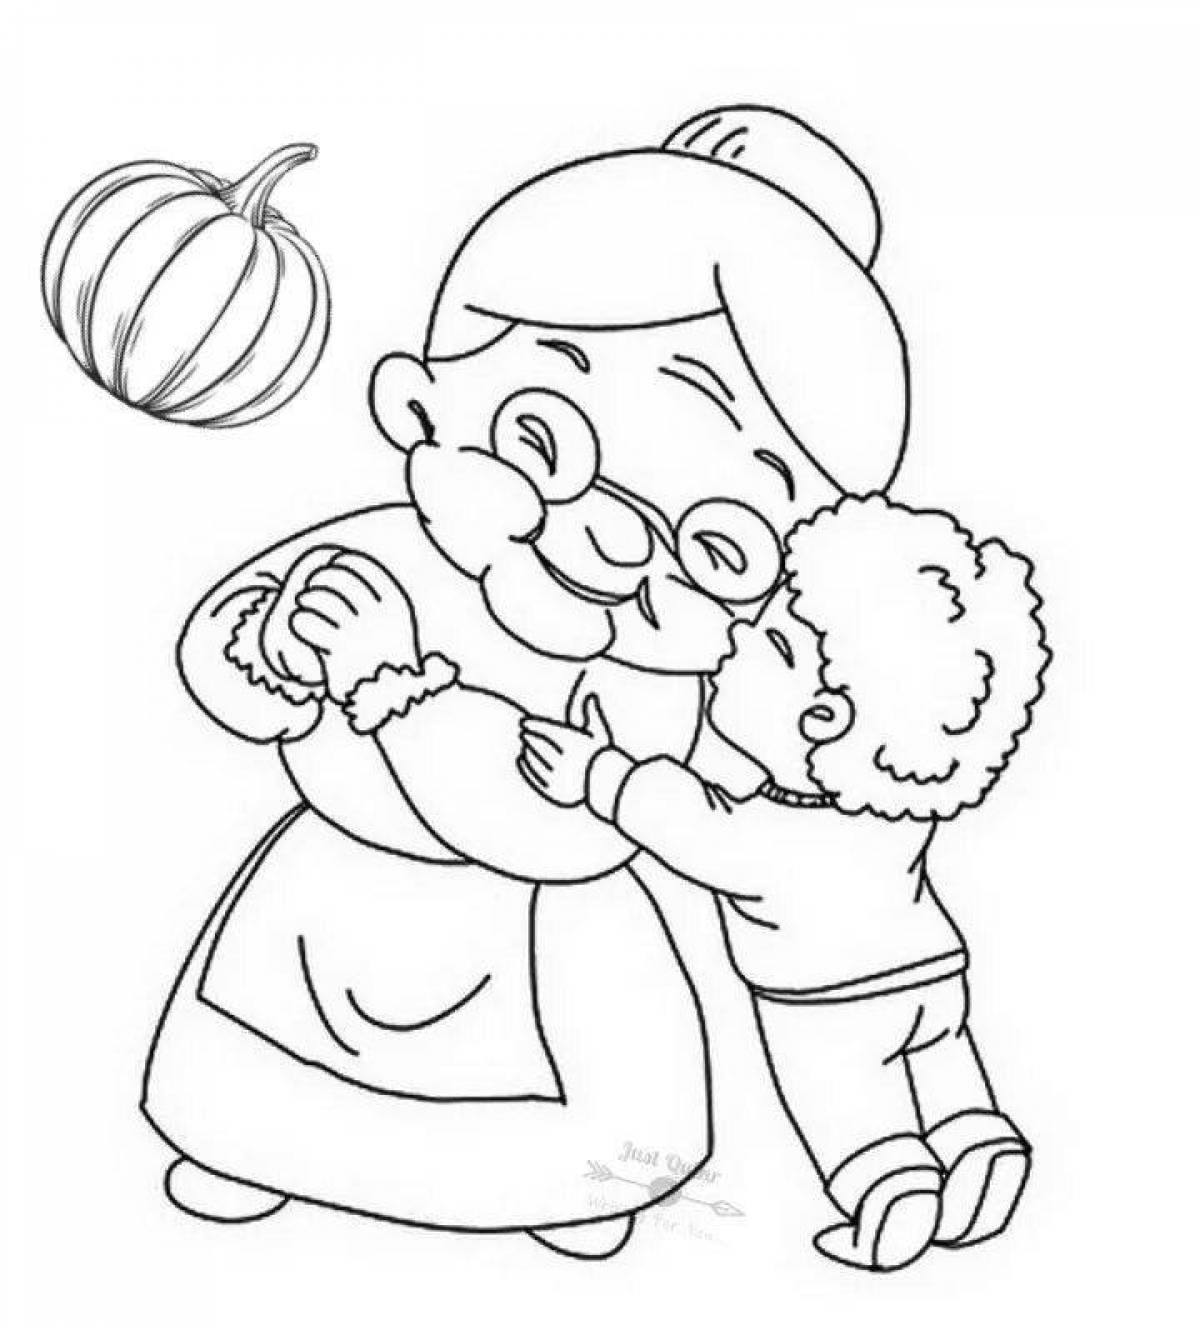 Glowing grandma and granddaughter coloring page